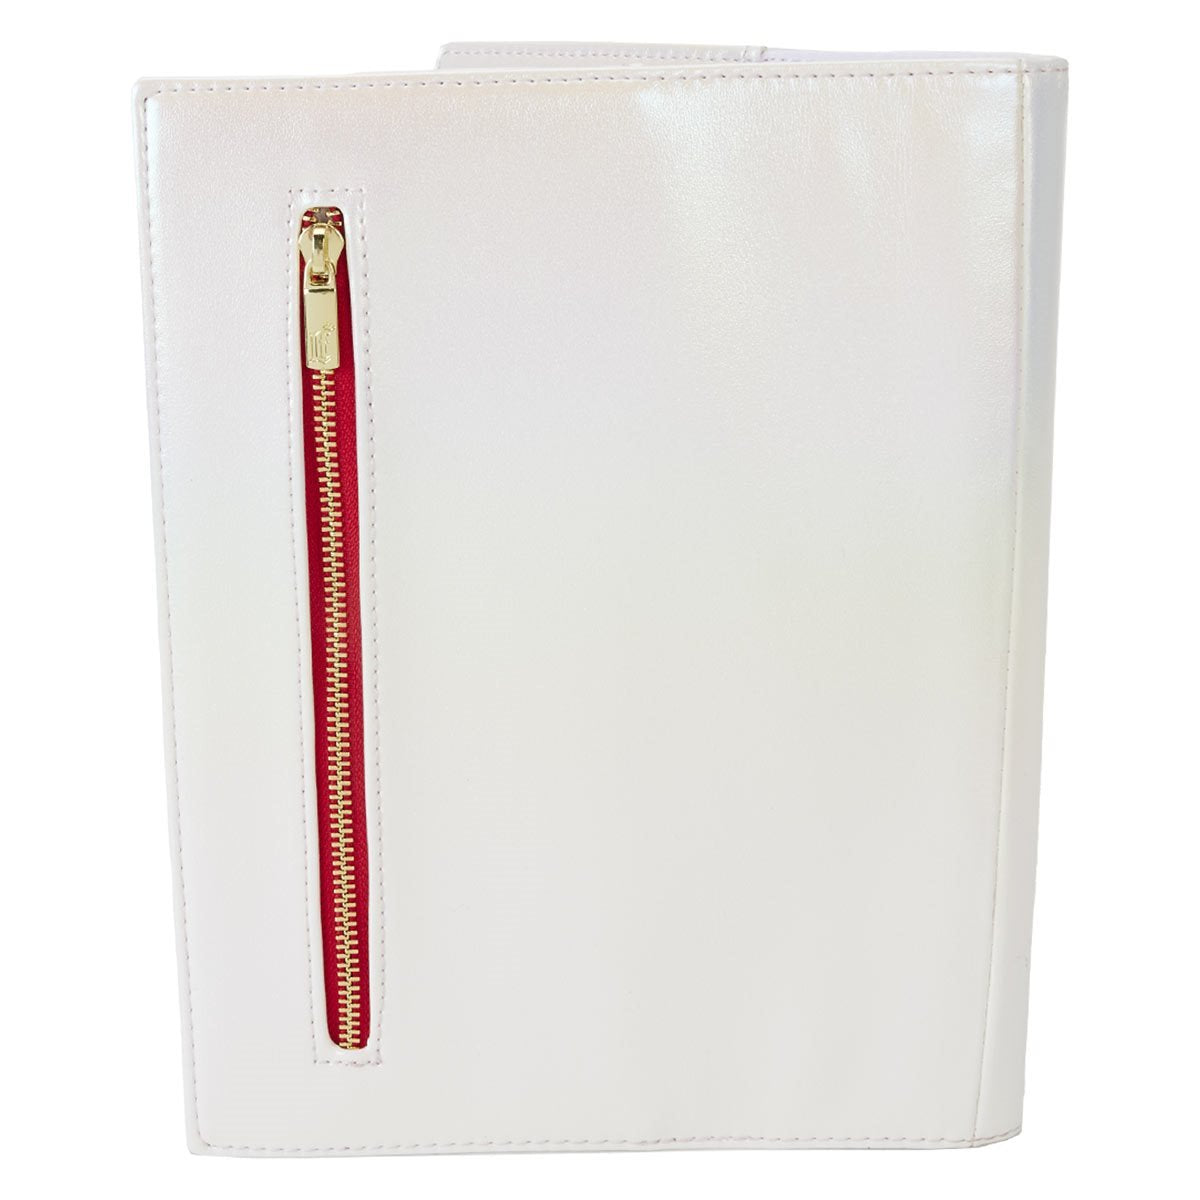 Hello Kitty 50th Anniversary Classic Pearlescent Refillable Journal